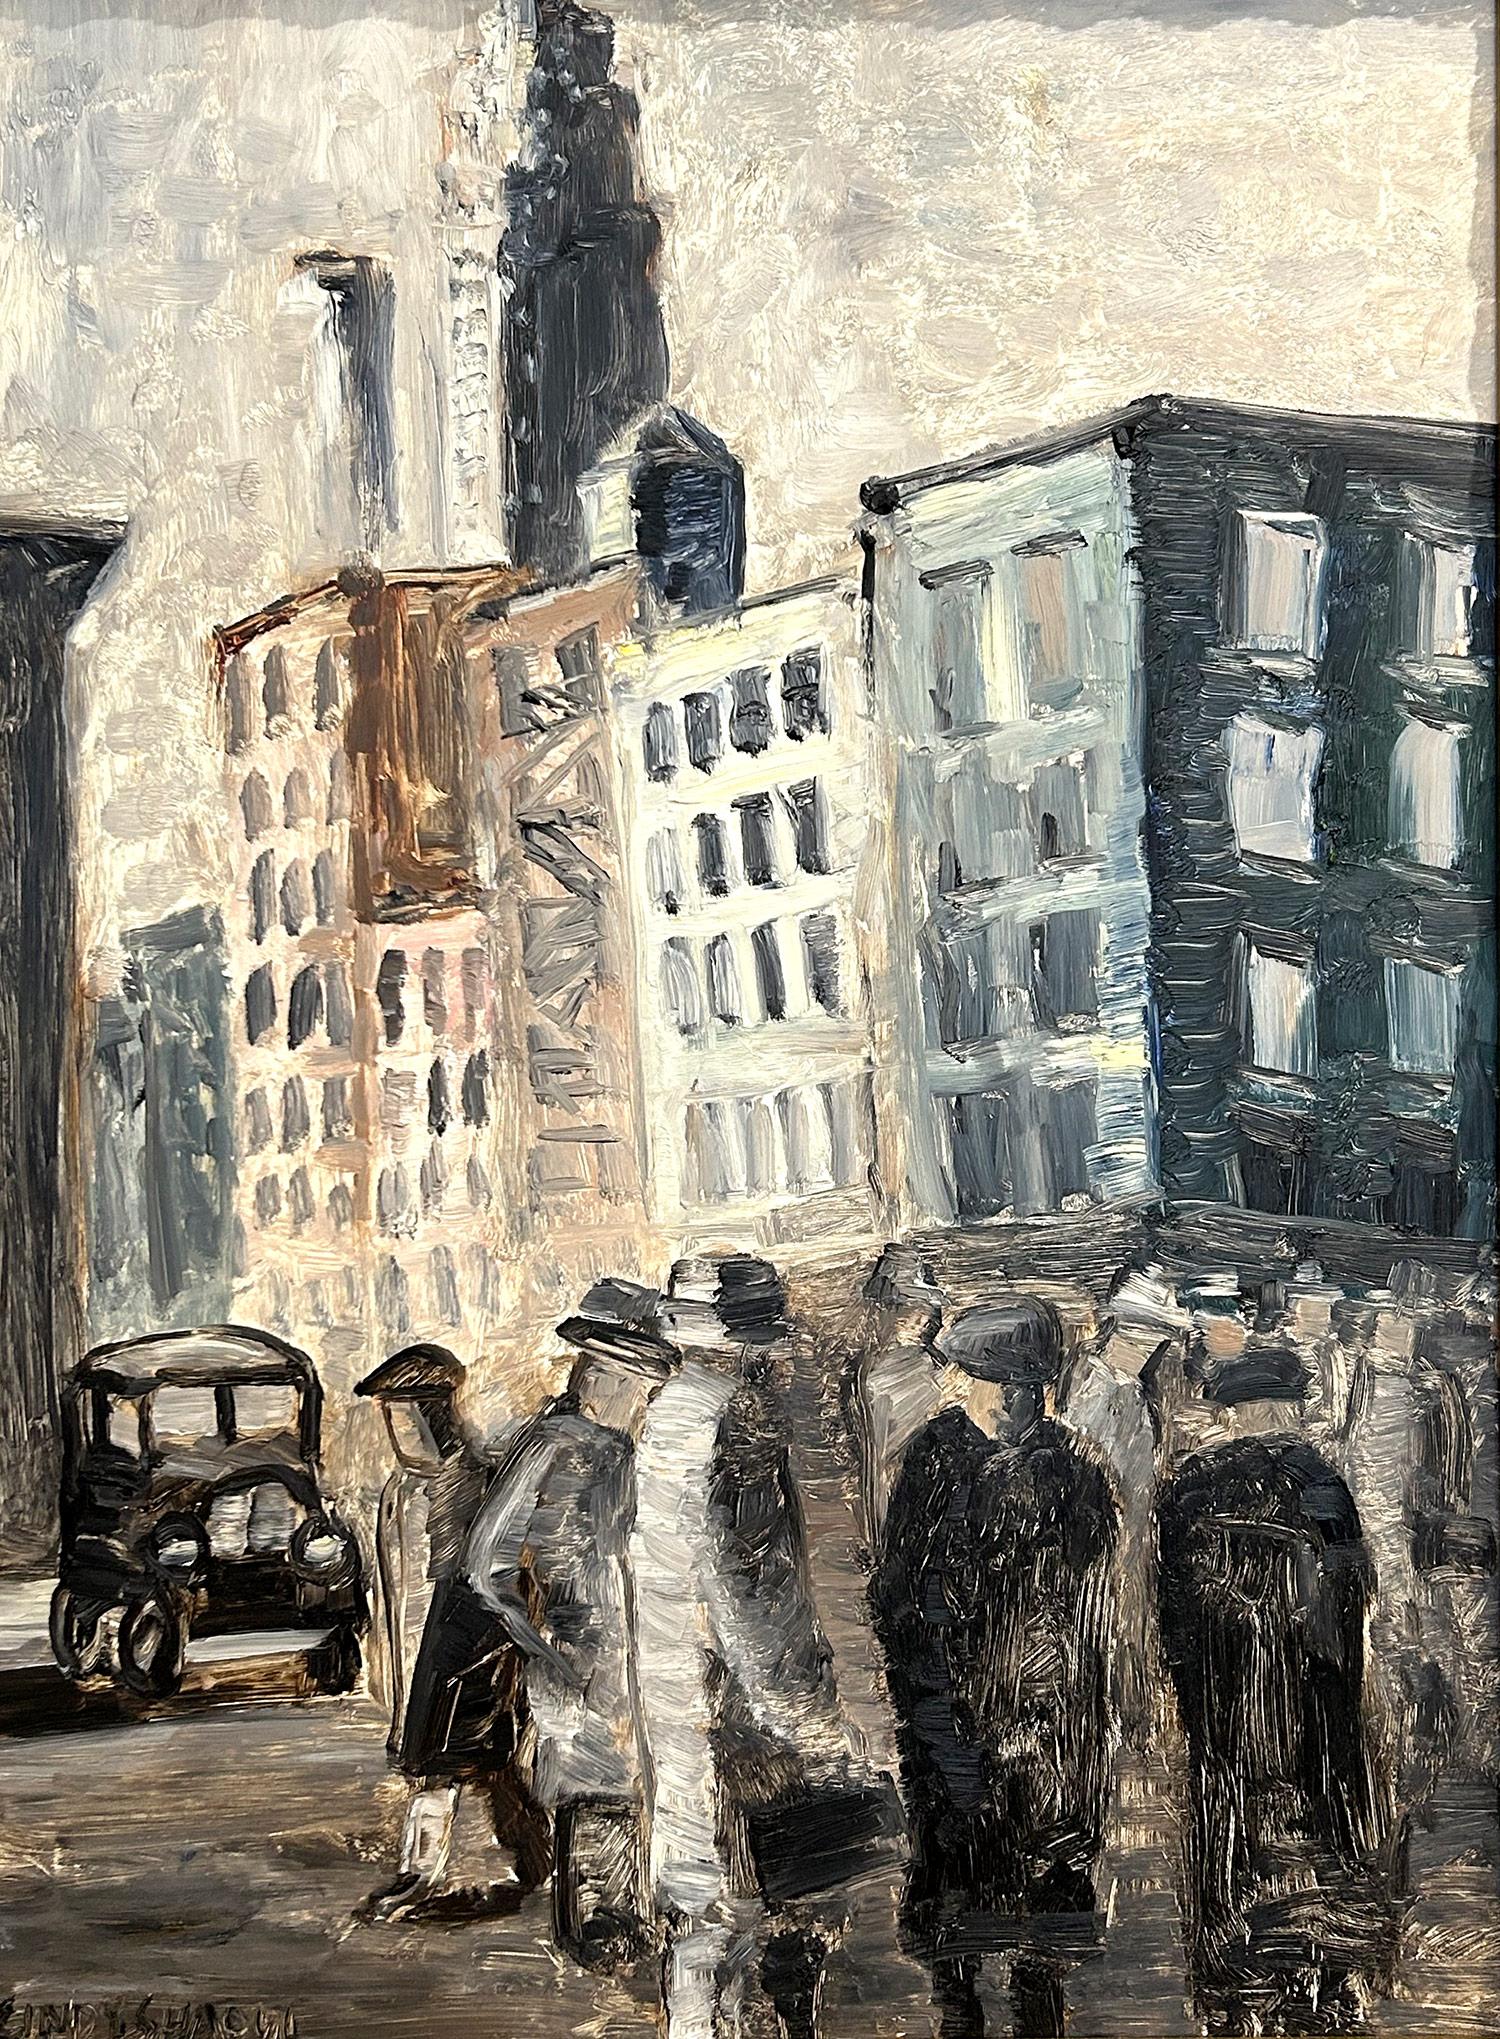 This painting depicts an impressionistic scene of figures filling up the NYC streets below the Empire State. The thick brush strokes and fun marks creates an atmosphere reminiscent of the Ashcan School from the 20th Century. We can feel the moment